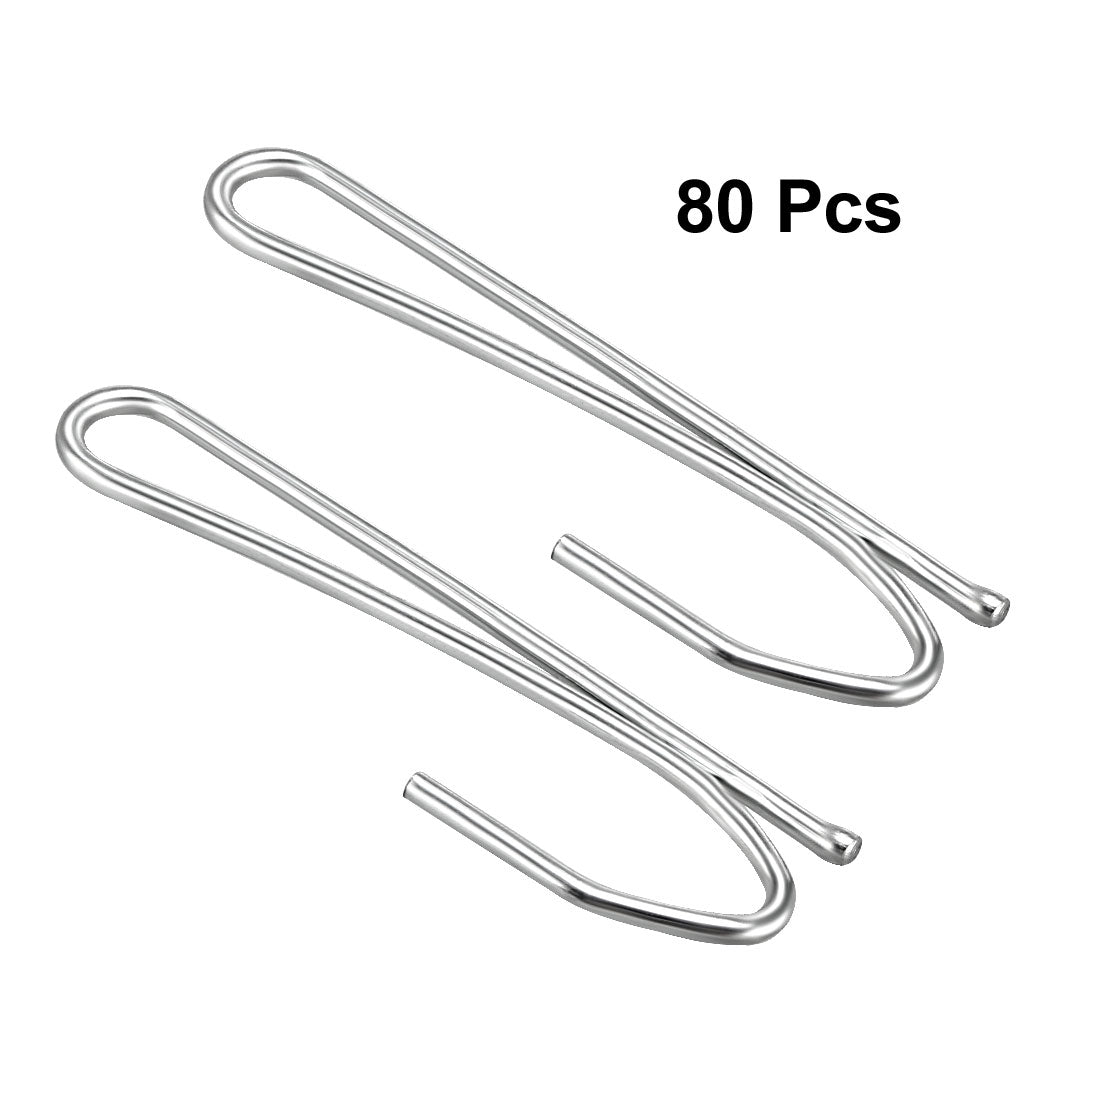 uxcell Uxcell Curtain Hooks Metal Single Prongs Pinch Pleat Drapery Hook for Drapes Tapes Silver Tone 80 Pcs